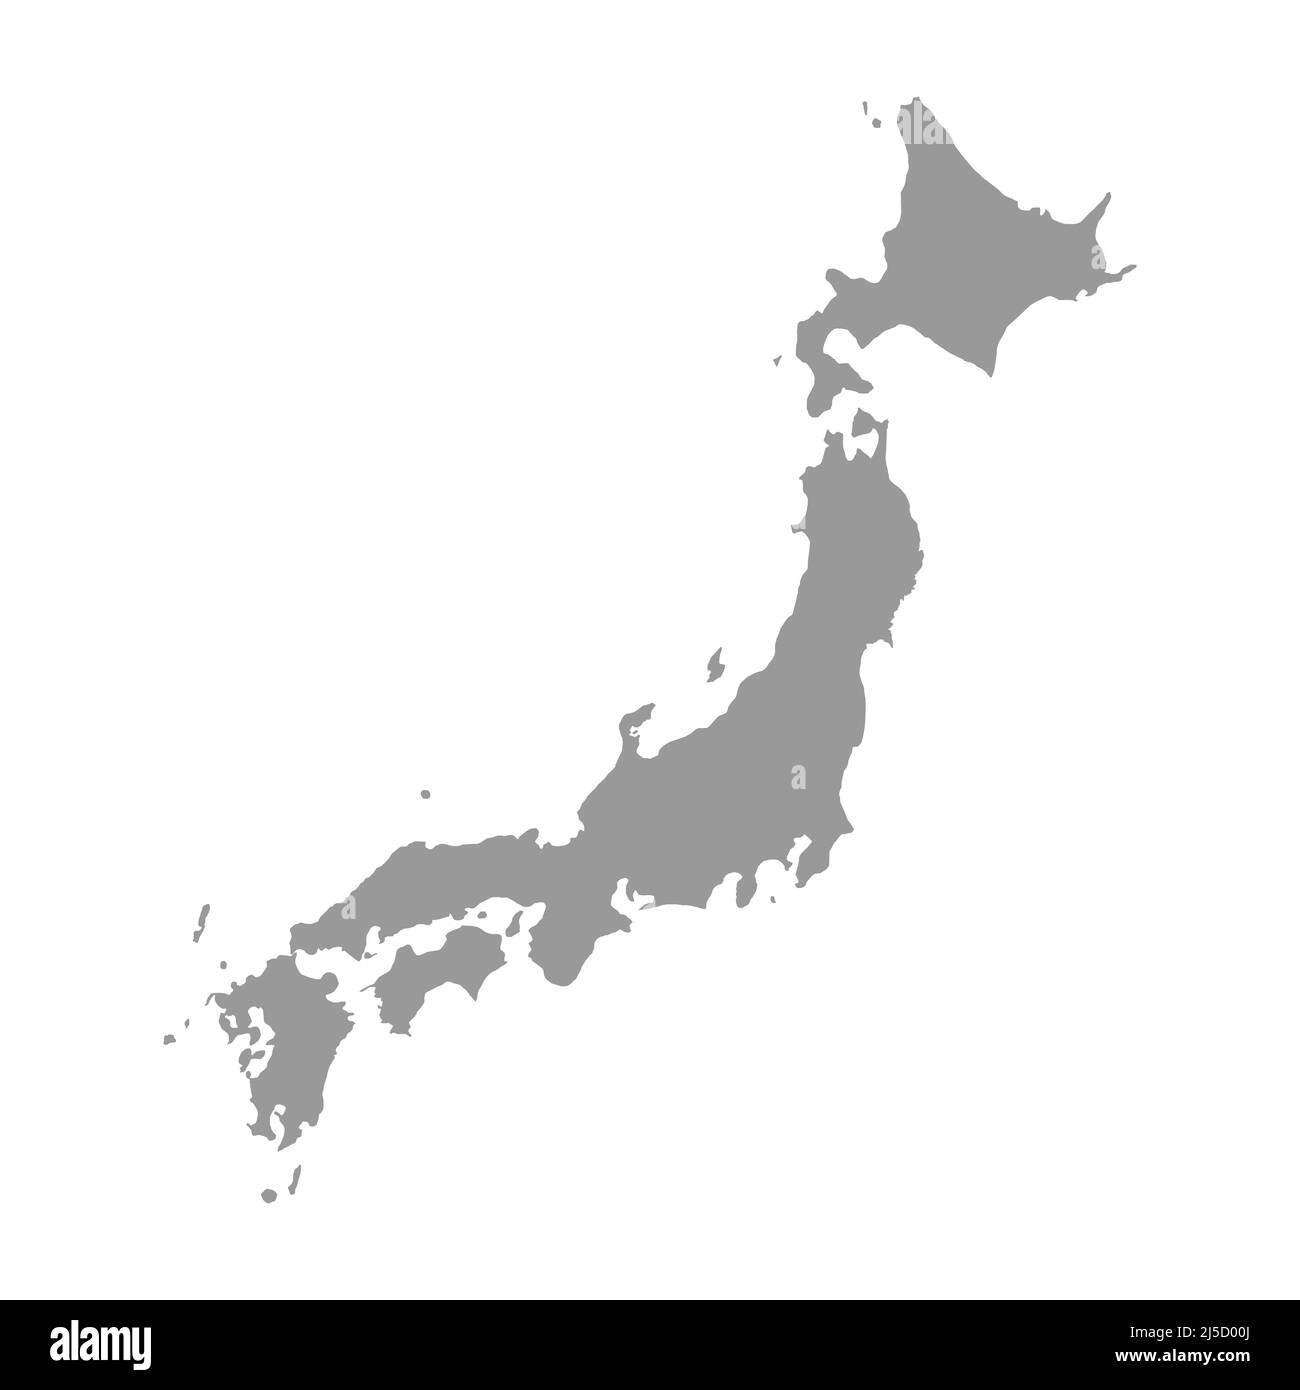 Japan map Black and White Stock Photos & Images - Alamy